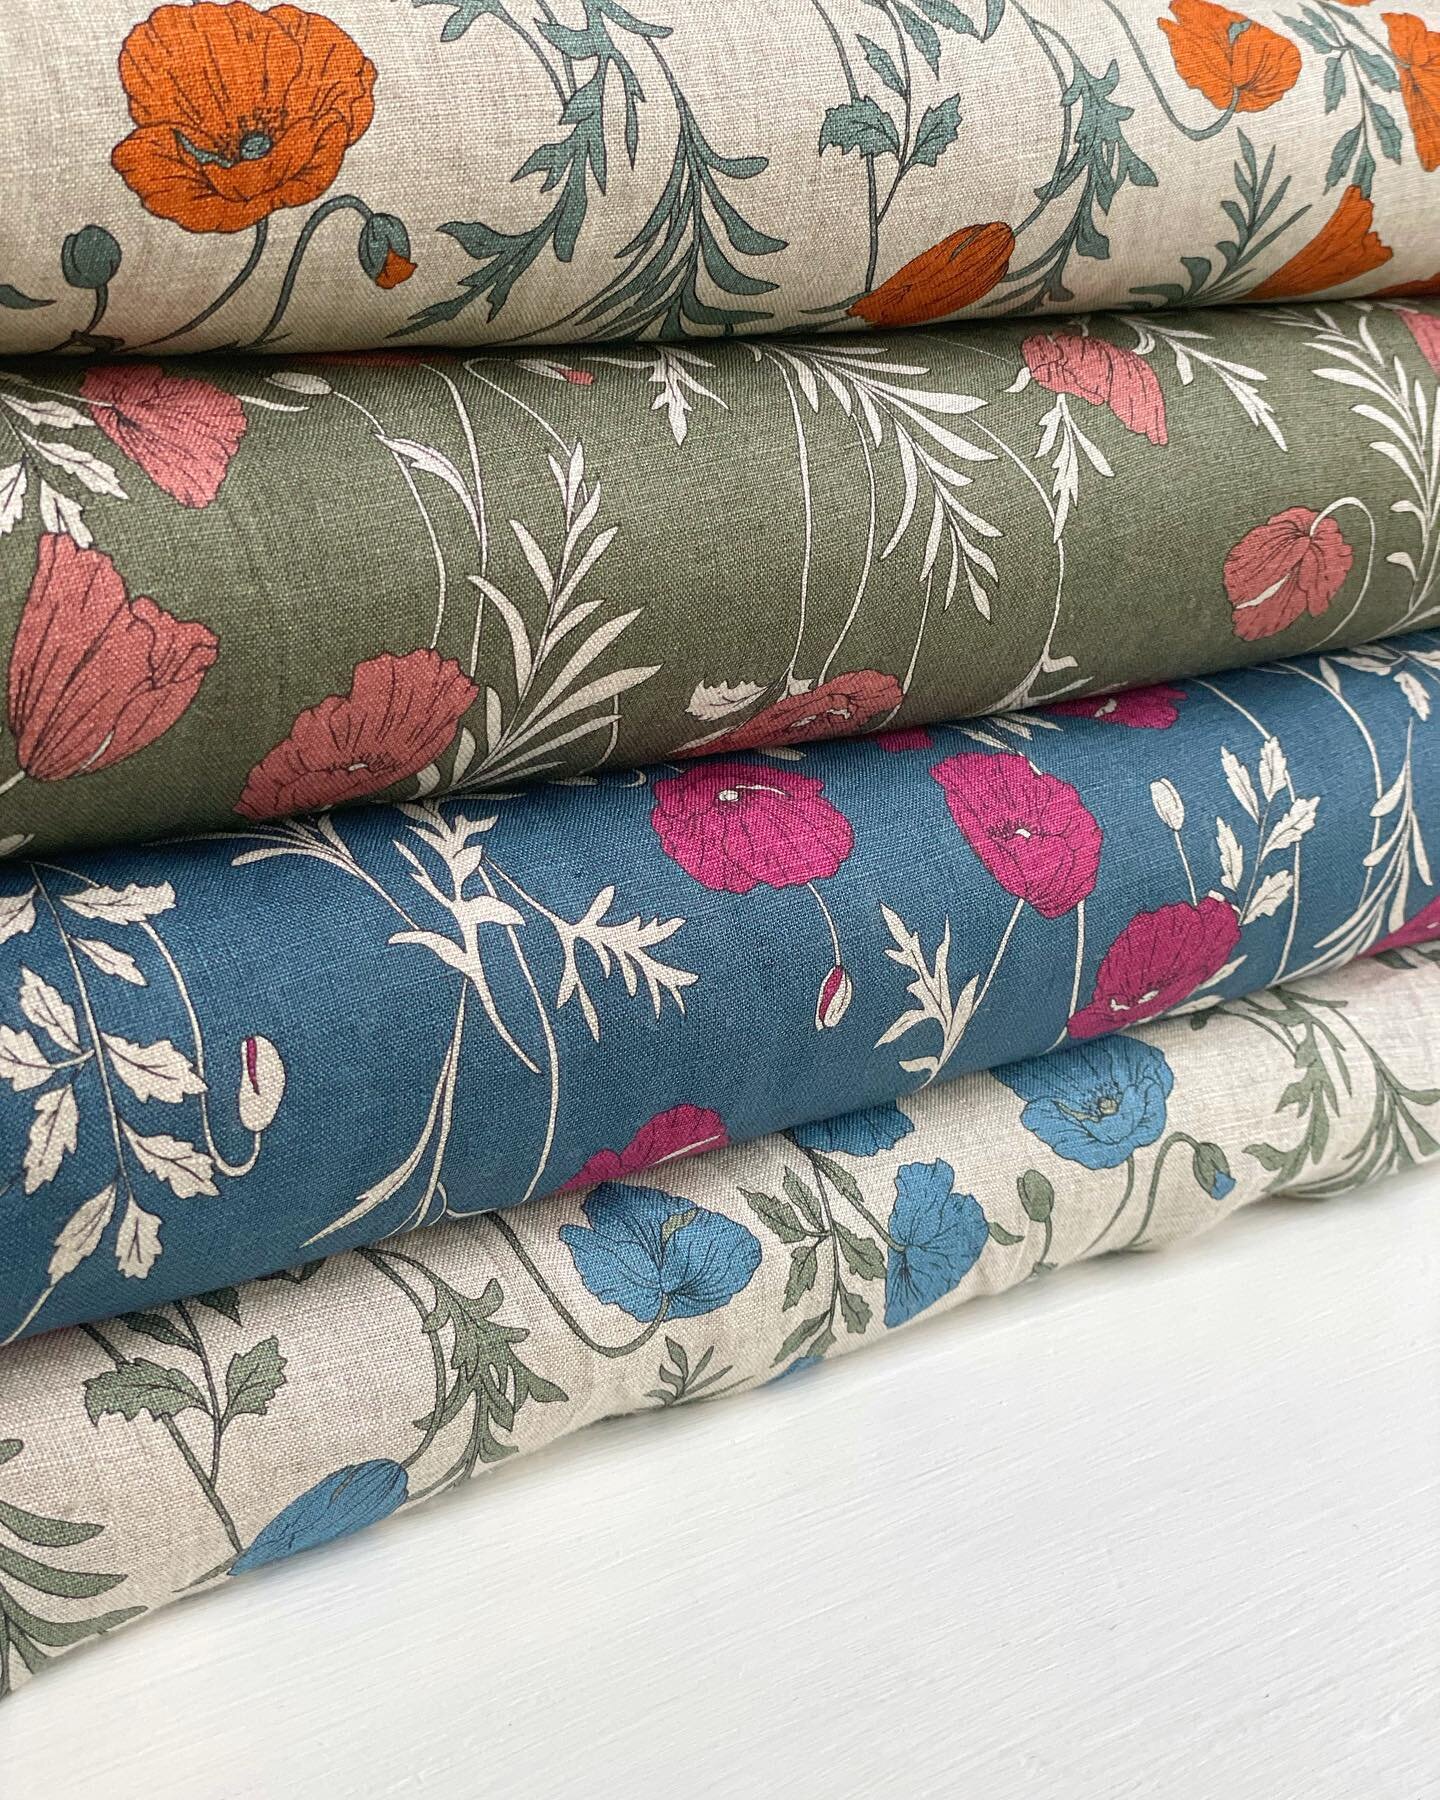 summer&rsquo;s perfect fabric is back in stock!  everyone&rsquo;s favorite linen poppies from Japan are perfect for sundresses, skirts, and tops. #shopstitchcraft #japanesefabric #imakemyownclothes #slowfashionmovement #slowfashion #slowsewing